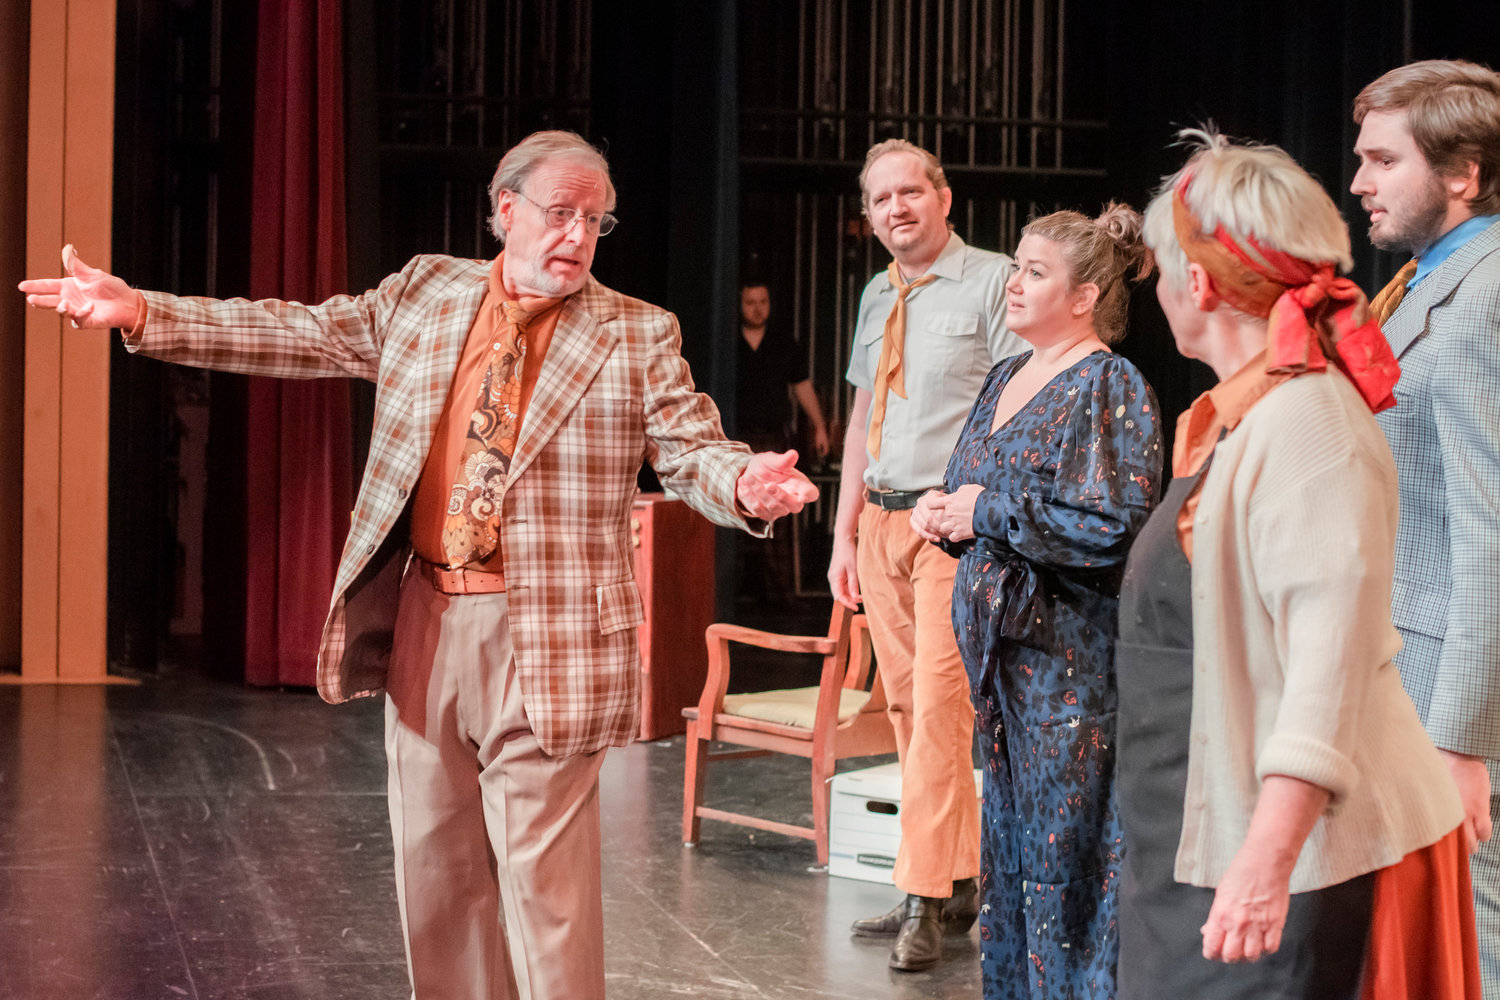 D. Douglas Lukascik as Selsdon Mowbray, far left, performs alongside actors and actresses on stage during dress rehearsals for the “Noises Off,” play at Centralia College on Friday.